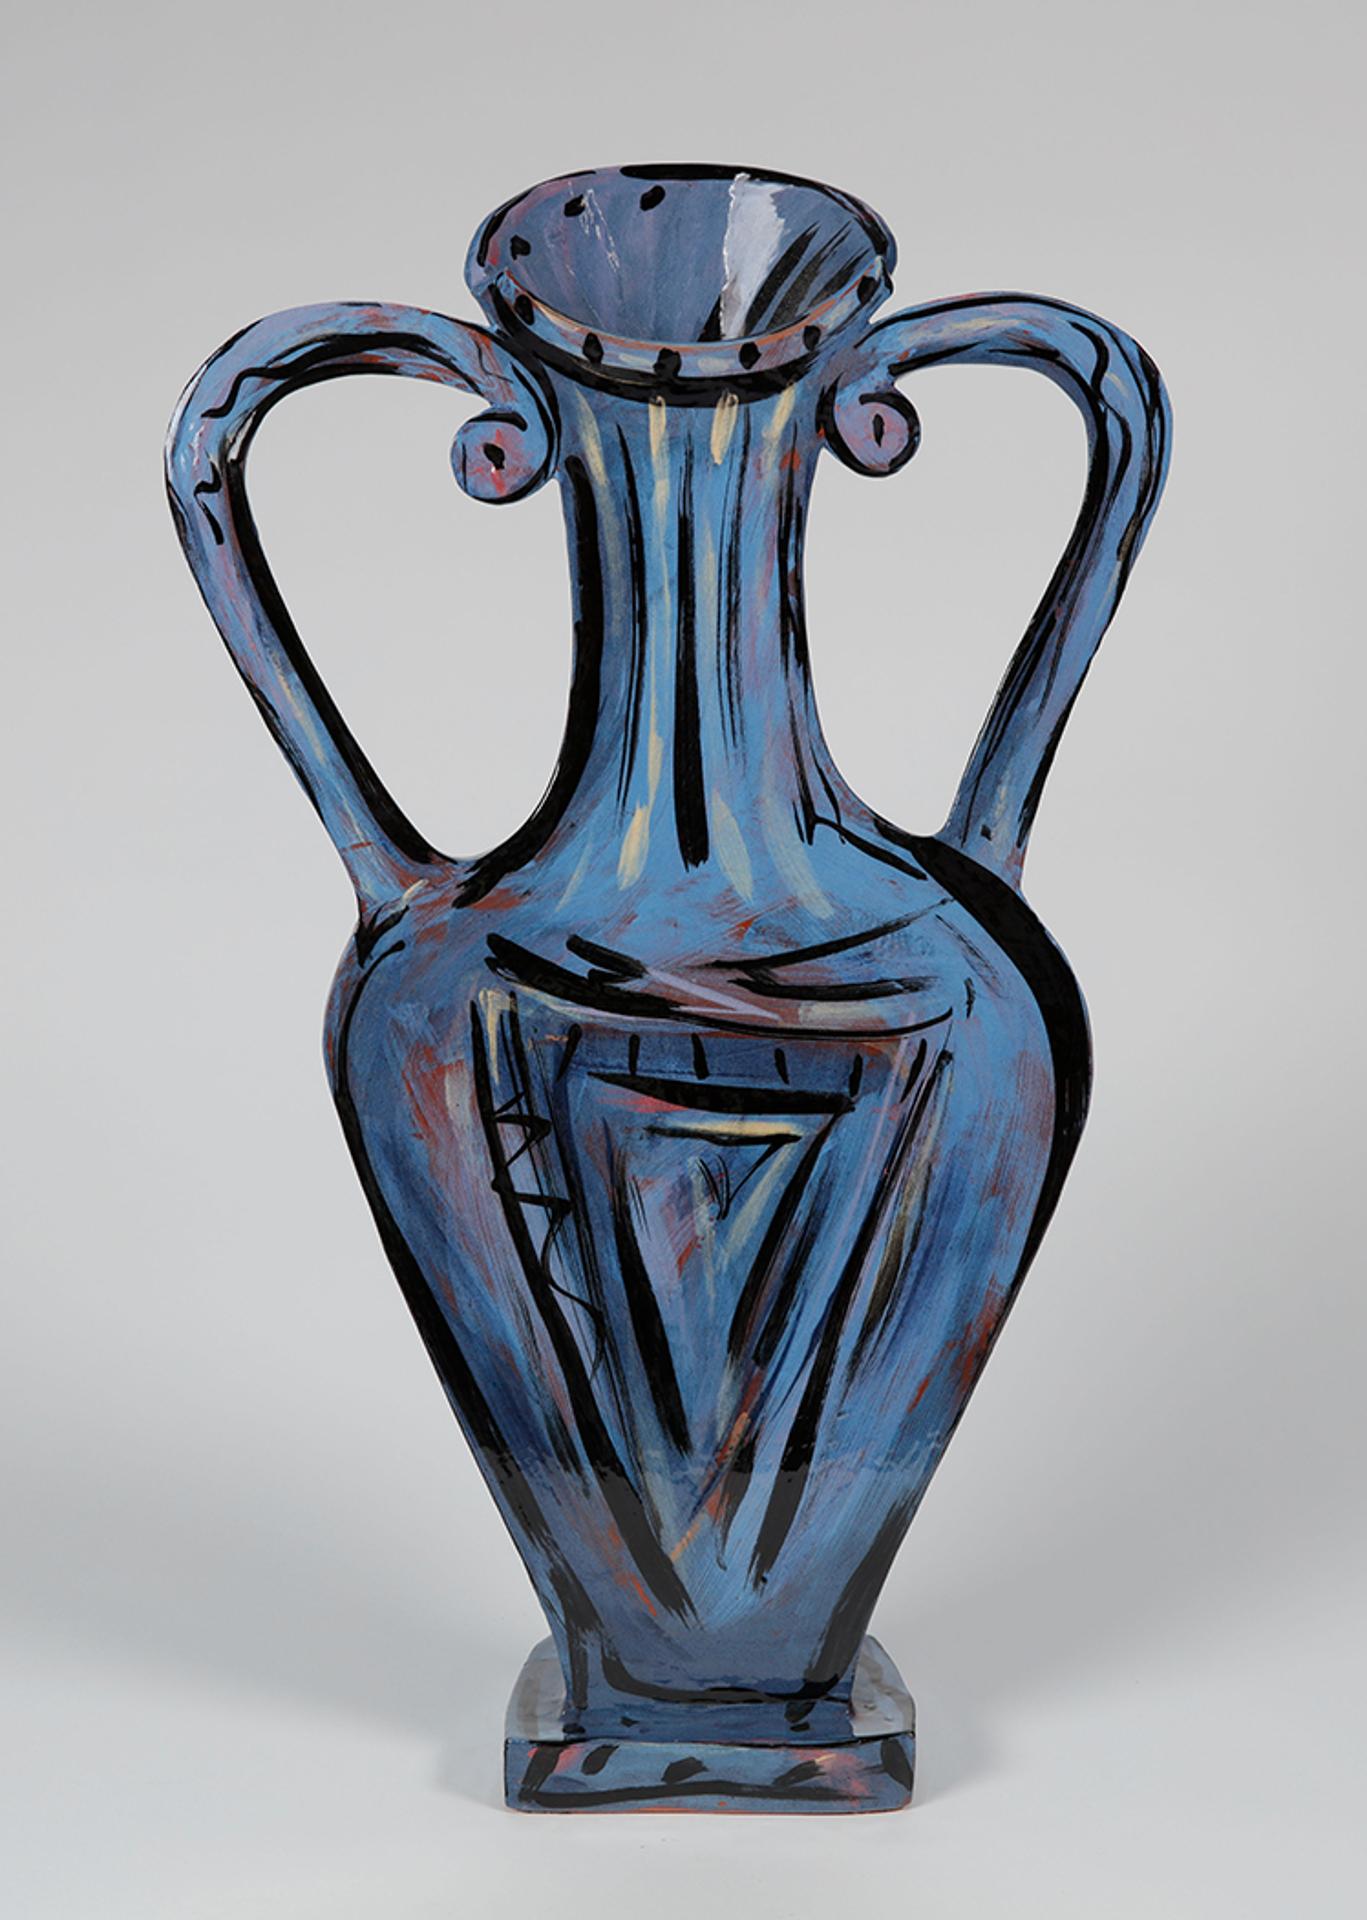 Kathryn Youngs (1952) - Flat face vase No. 613